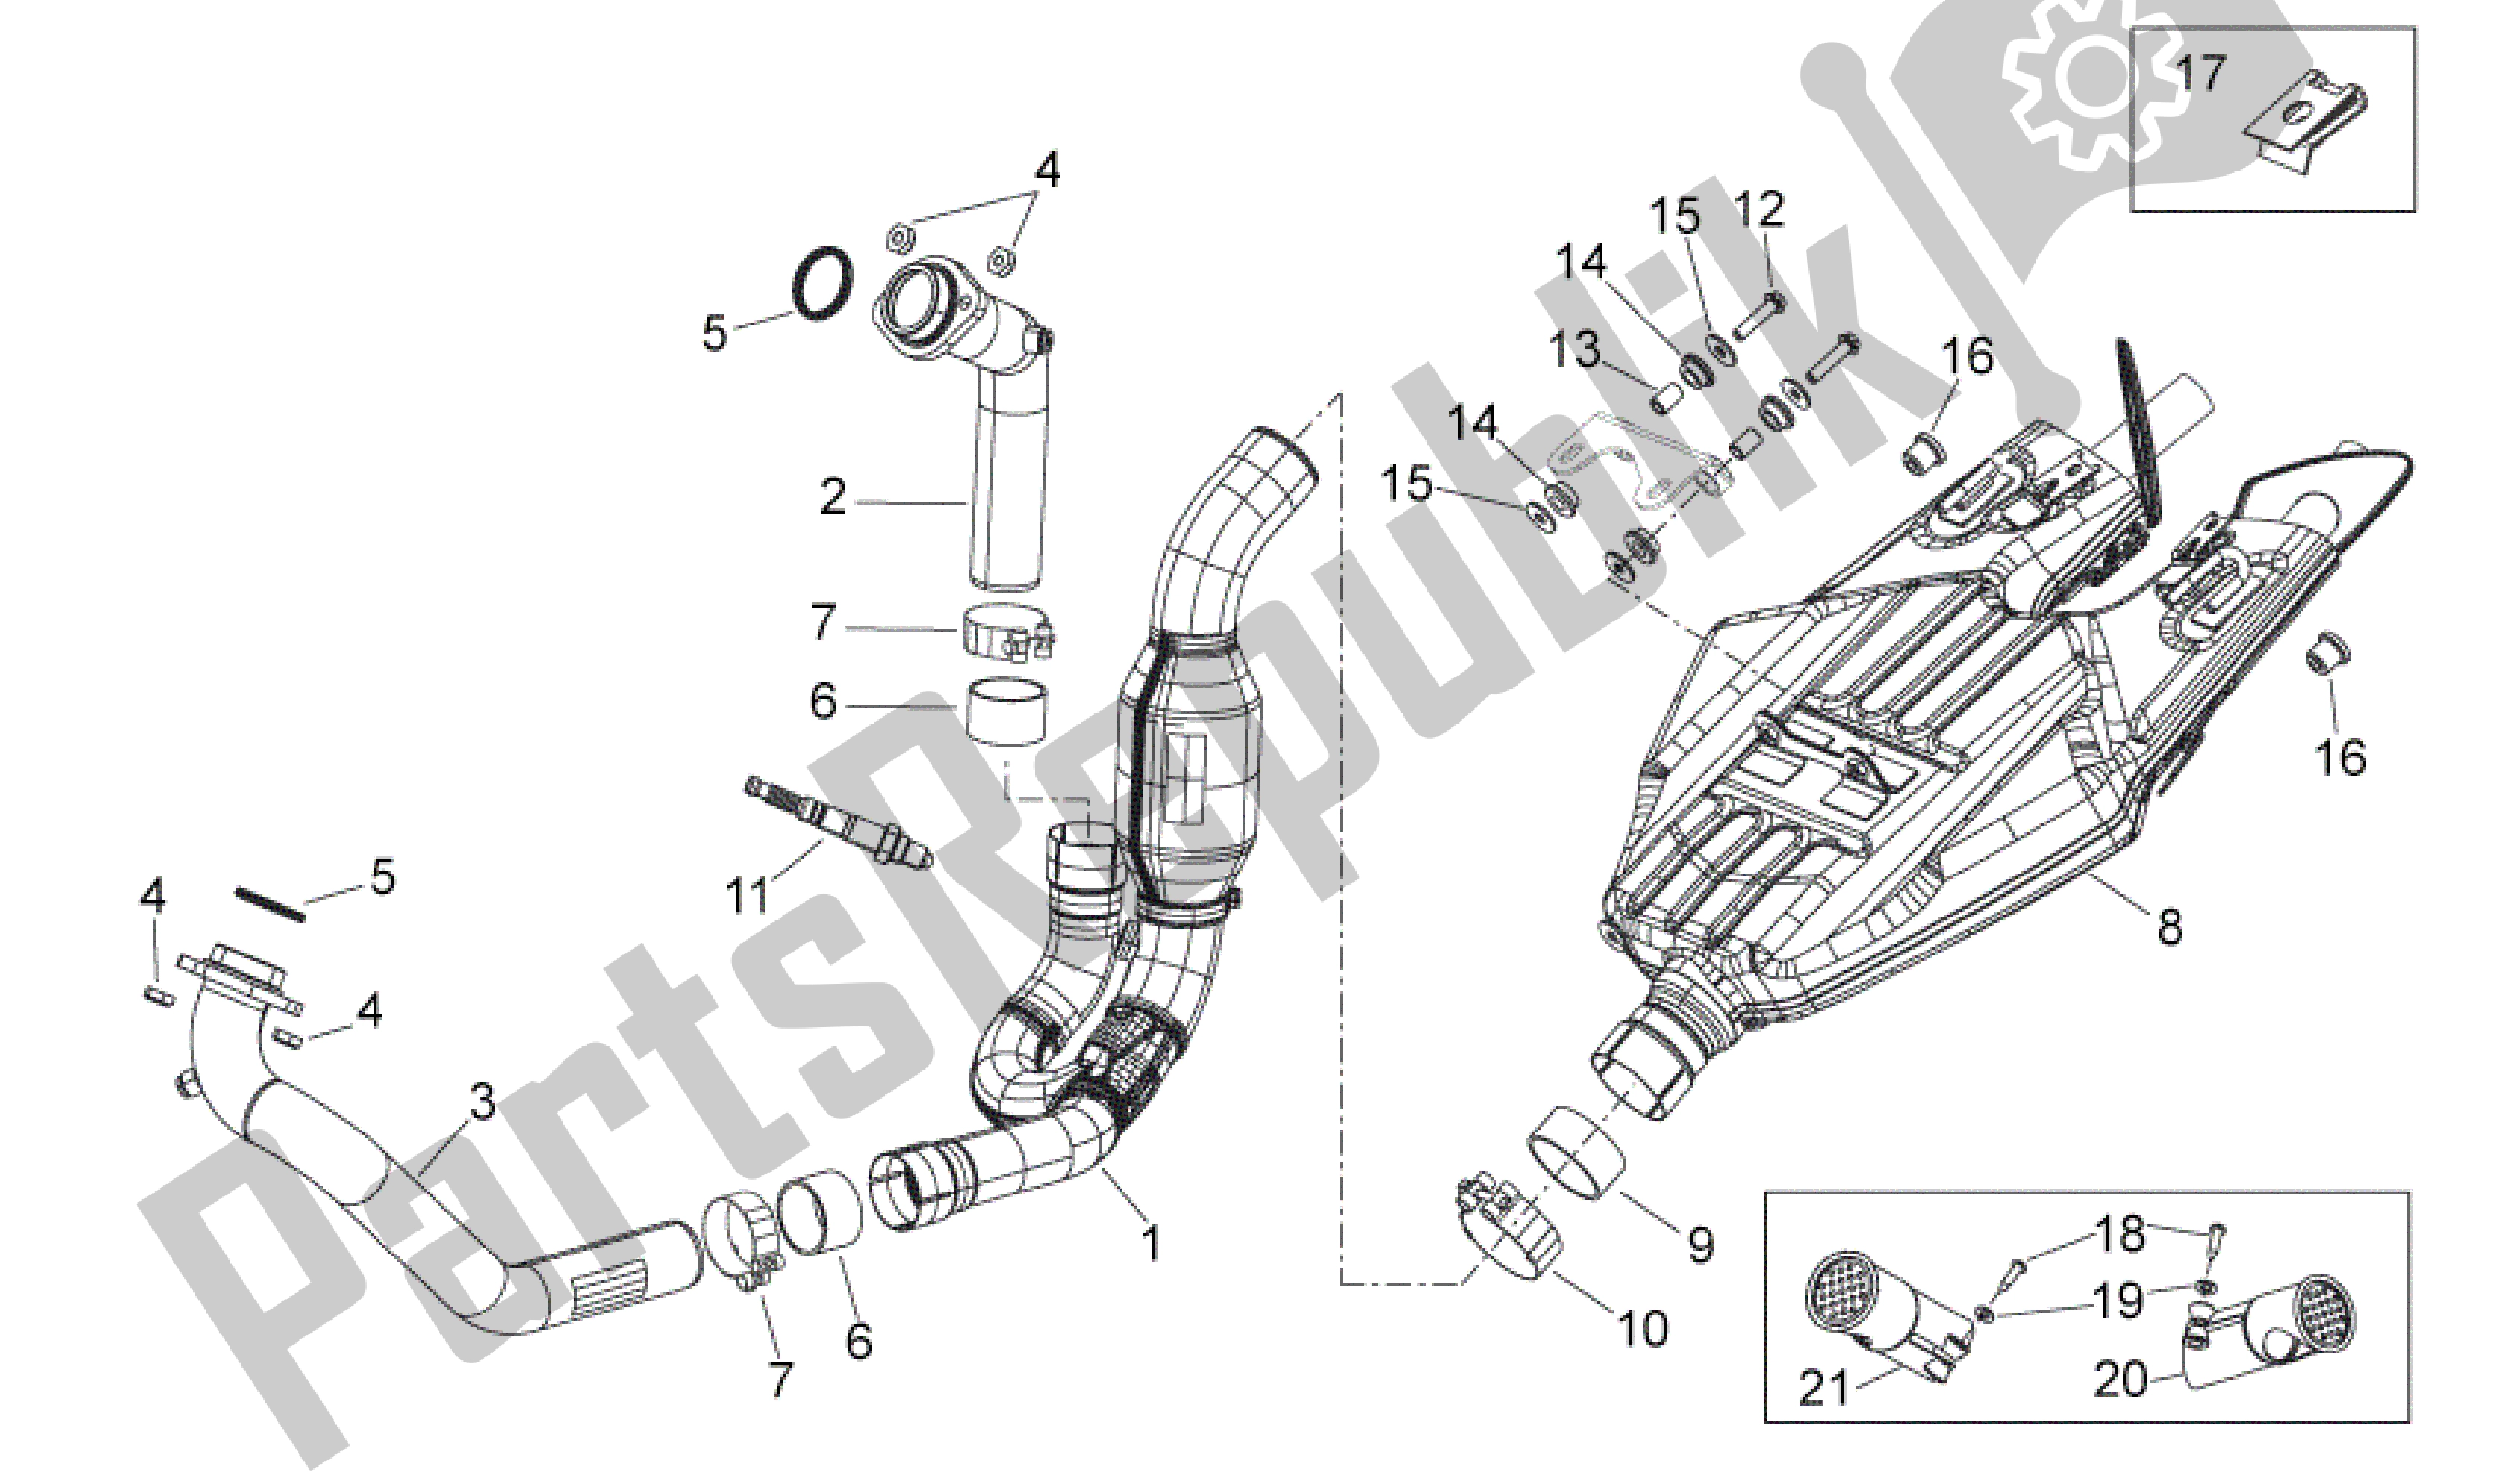 All parts for the Exhaust Unit of the Aprilia Shiver 750 2009